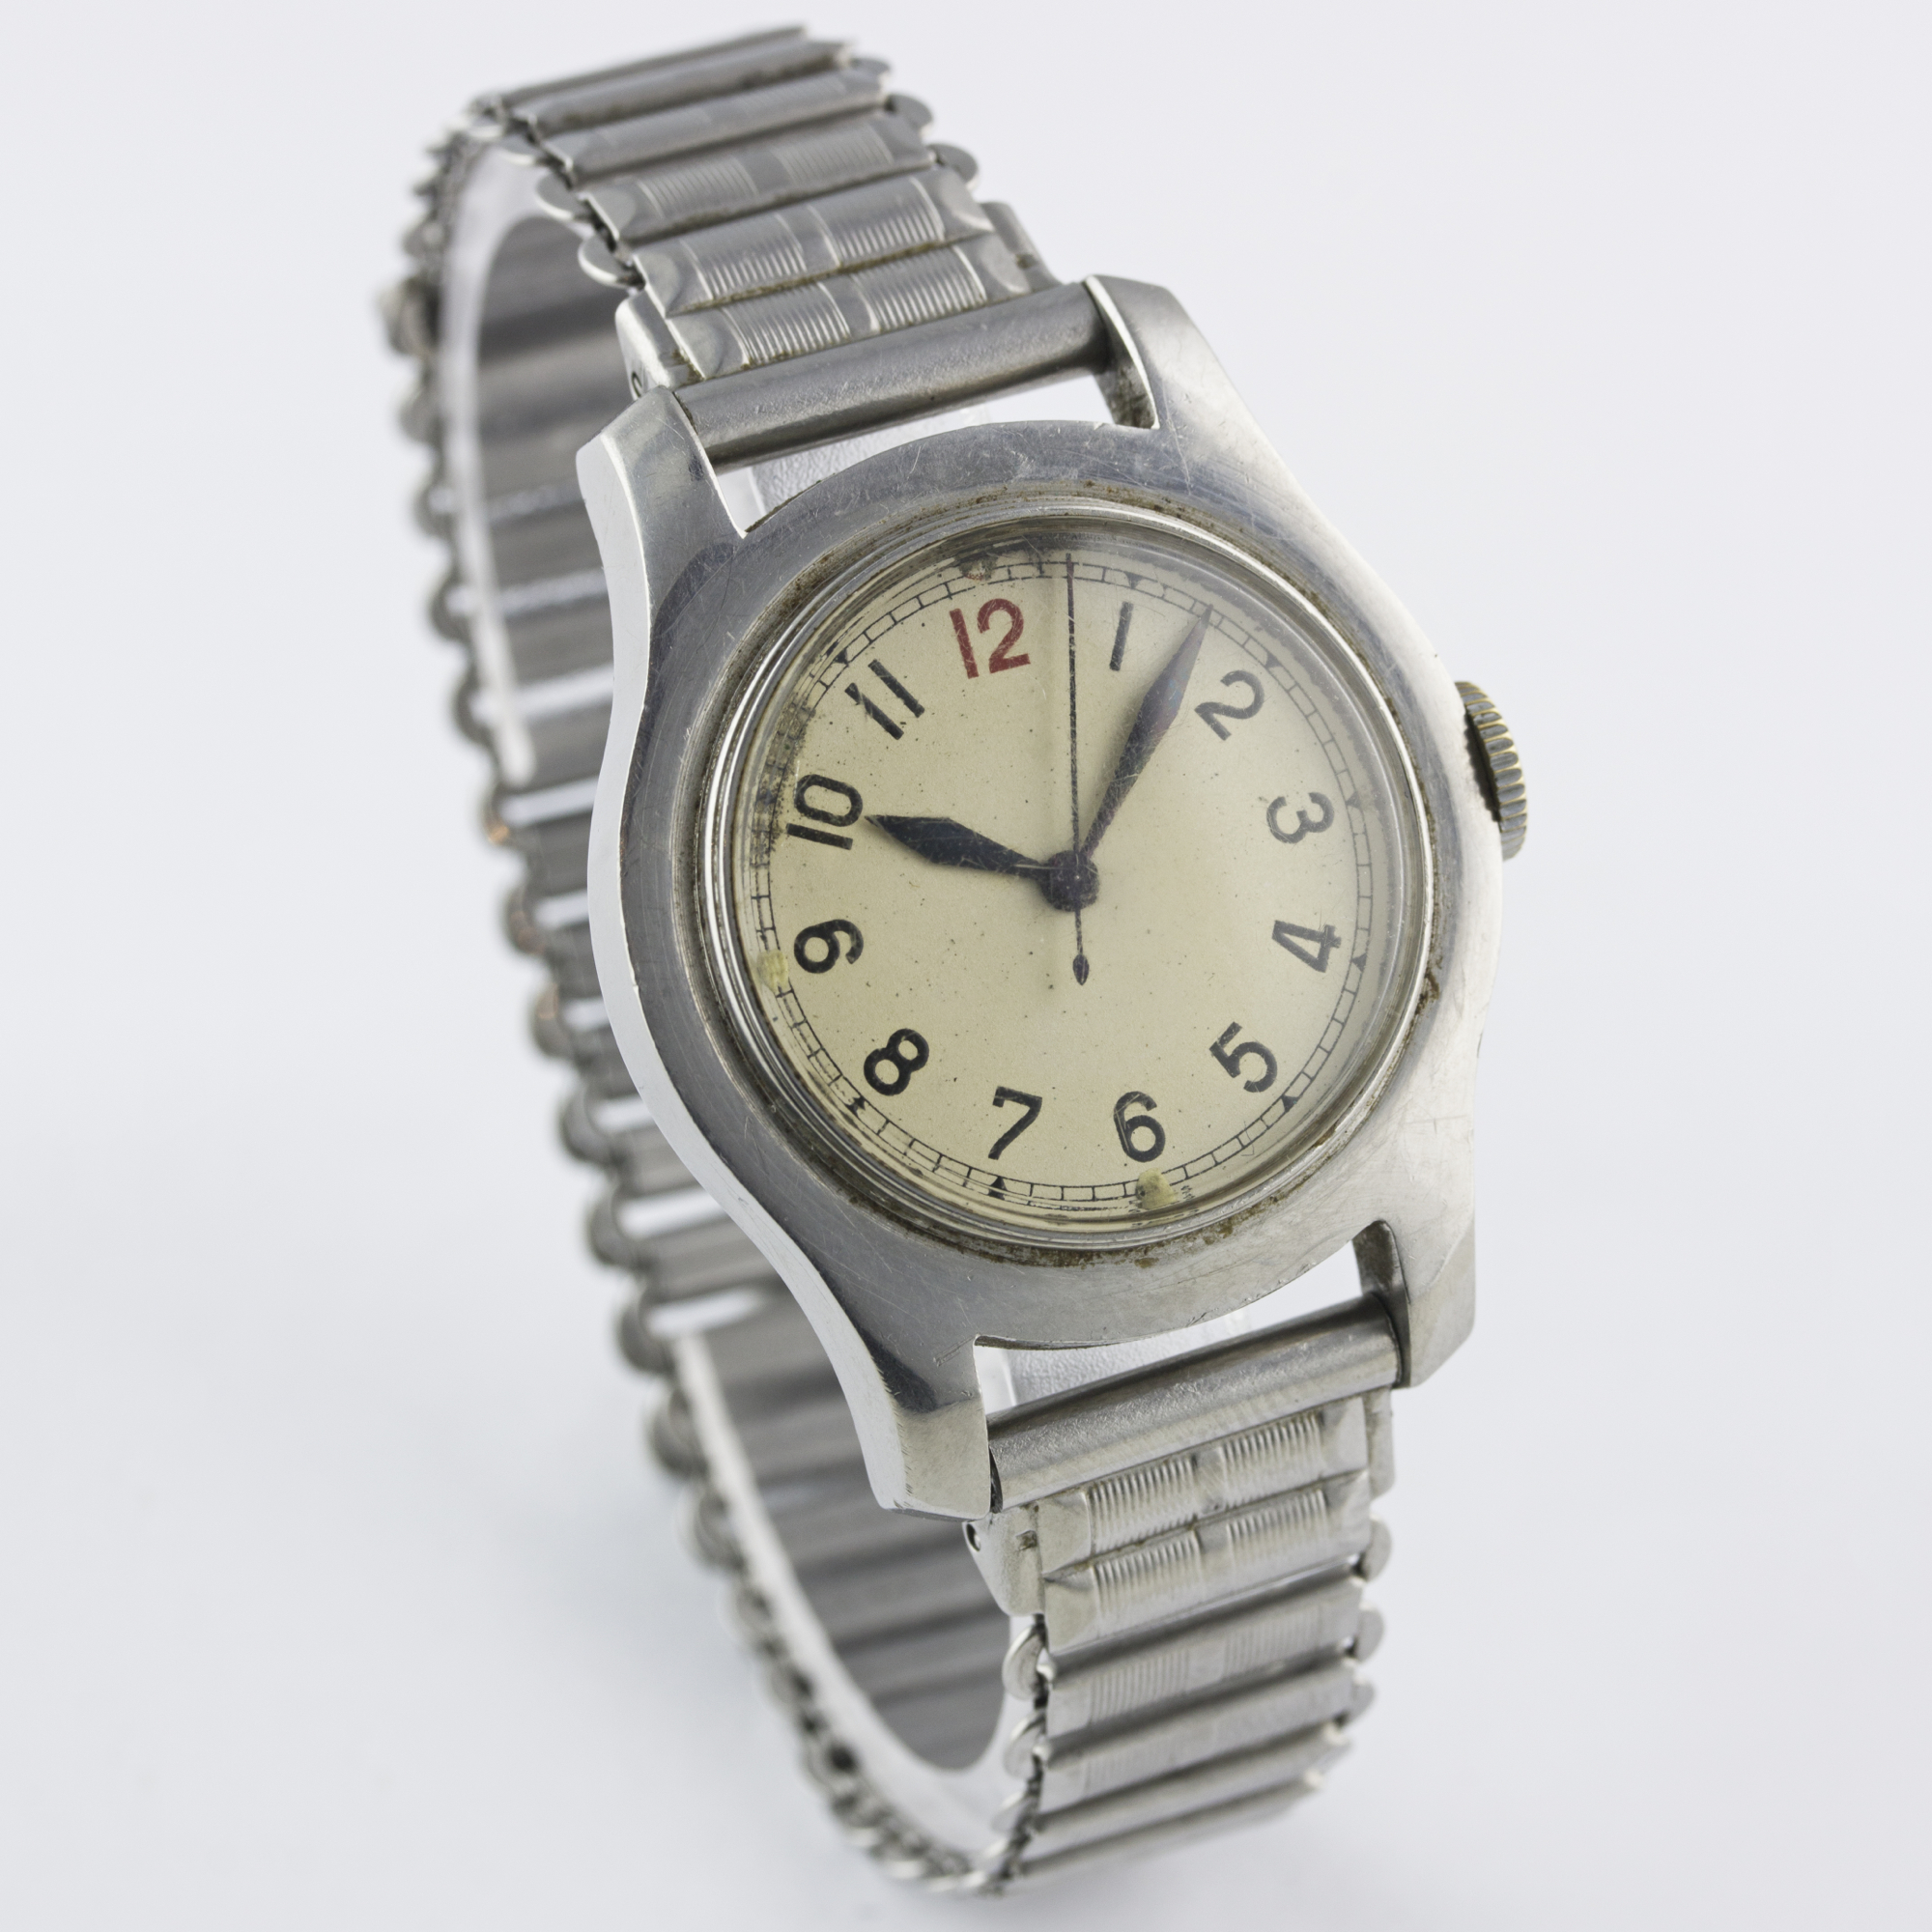 A GENTLEMAN'S STAINLESS STEEL BRITISH MILITARY RAF JAEGER LECOULTRE WEEMS AVIATORS BRACELET WATCH - Image 5 of 8